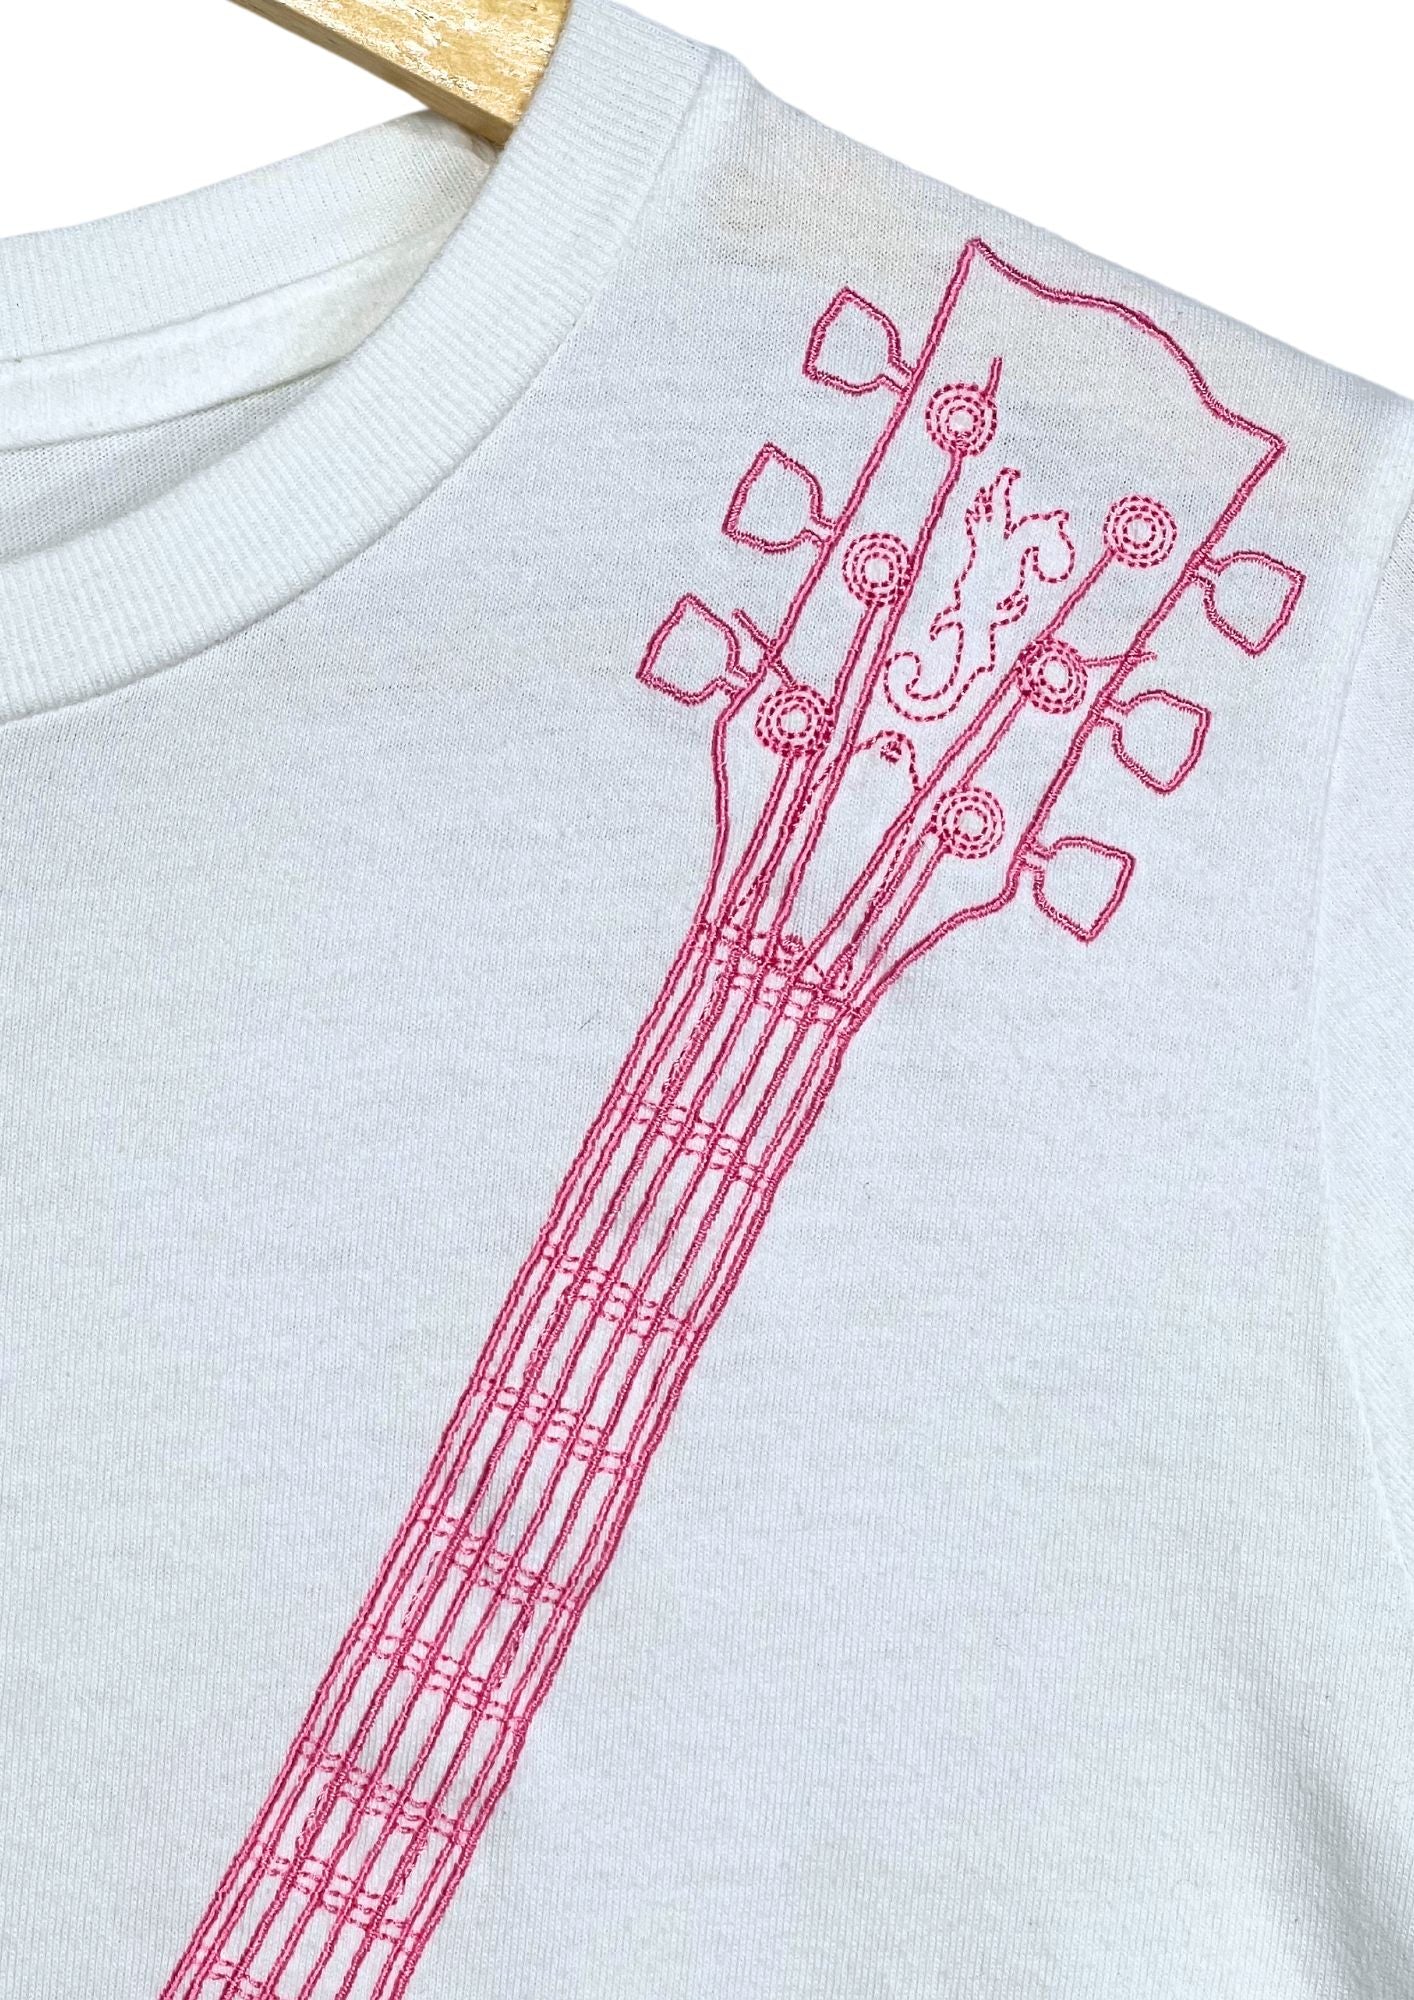 2014 SHEENA RINGO Ringo Expo 'Electric Guitar Counterattack'  Japanese Band Embroidered T-shirt